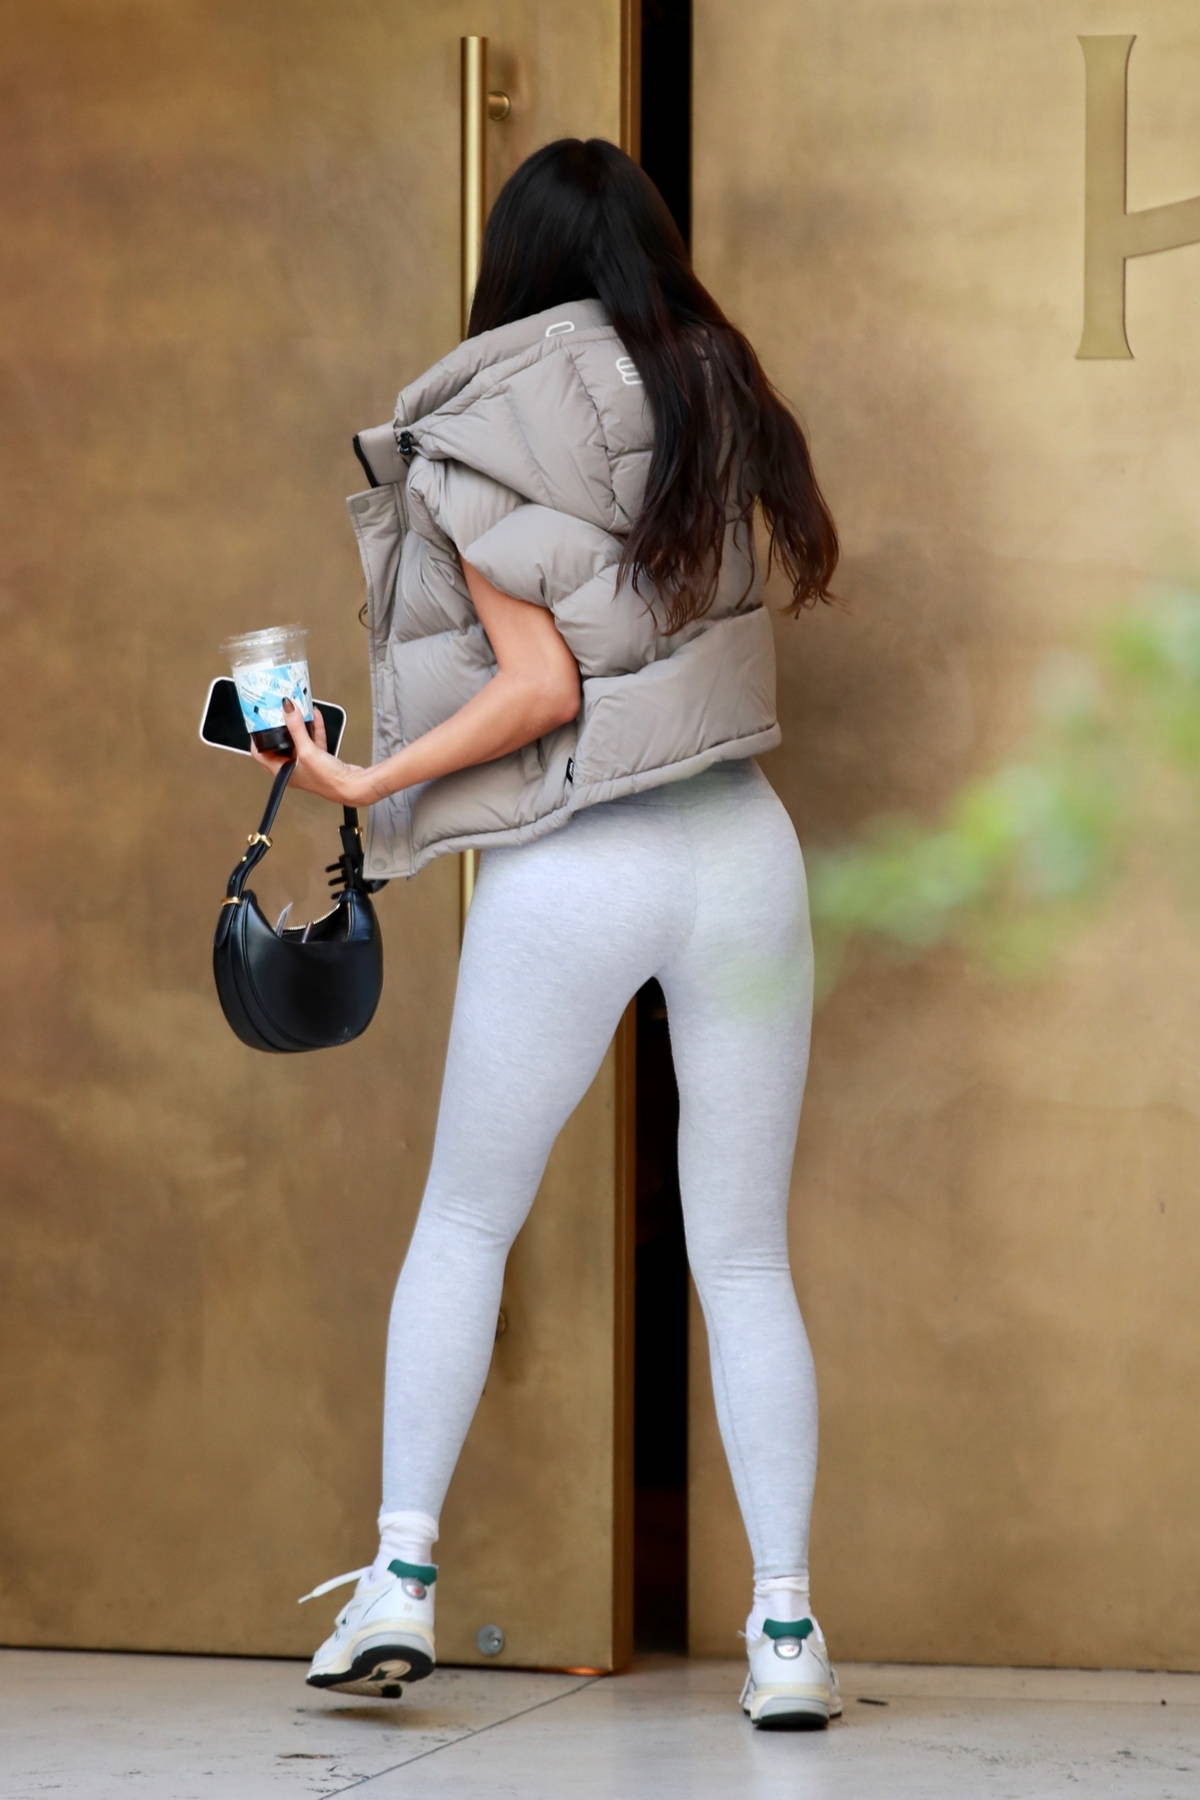 Eiza Gonzalez shows off her fabulous frame in grey leggings and a